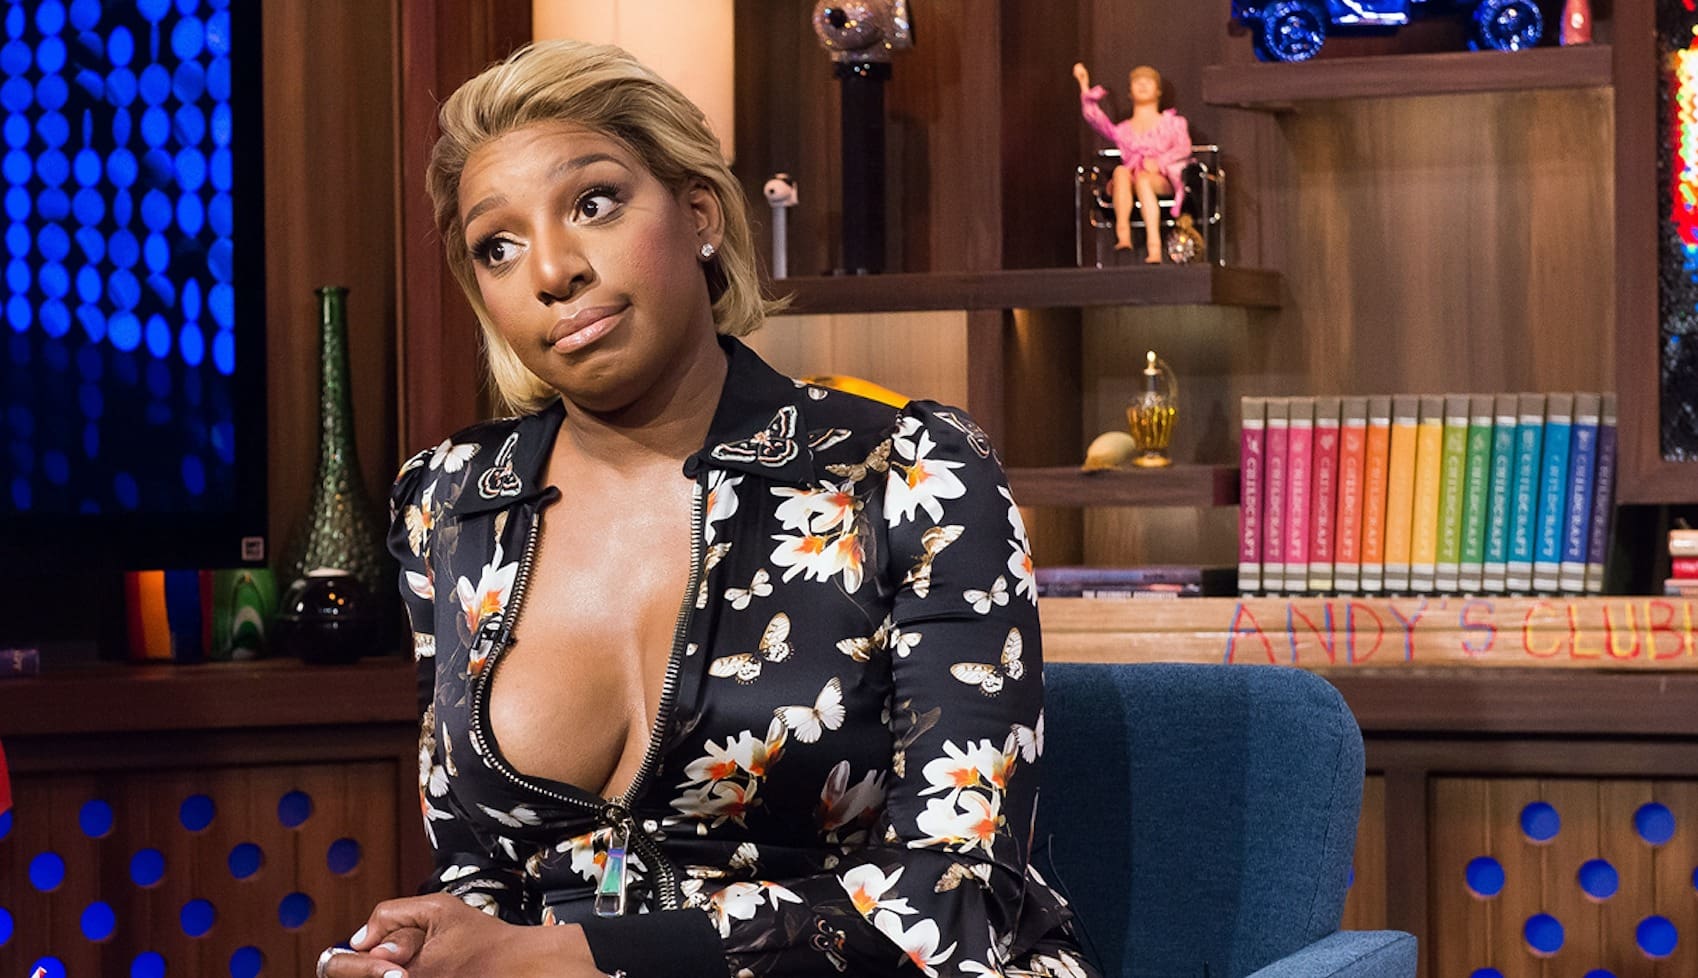 NeNe Leakes Responds To Eva Marcille's Challenge With This New Song